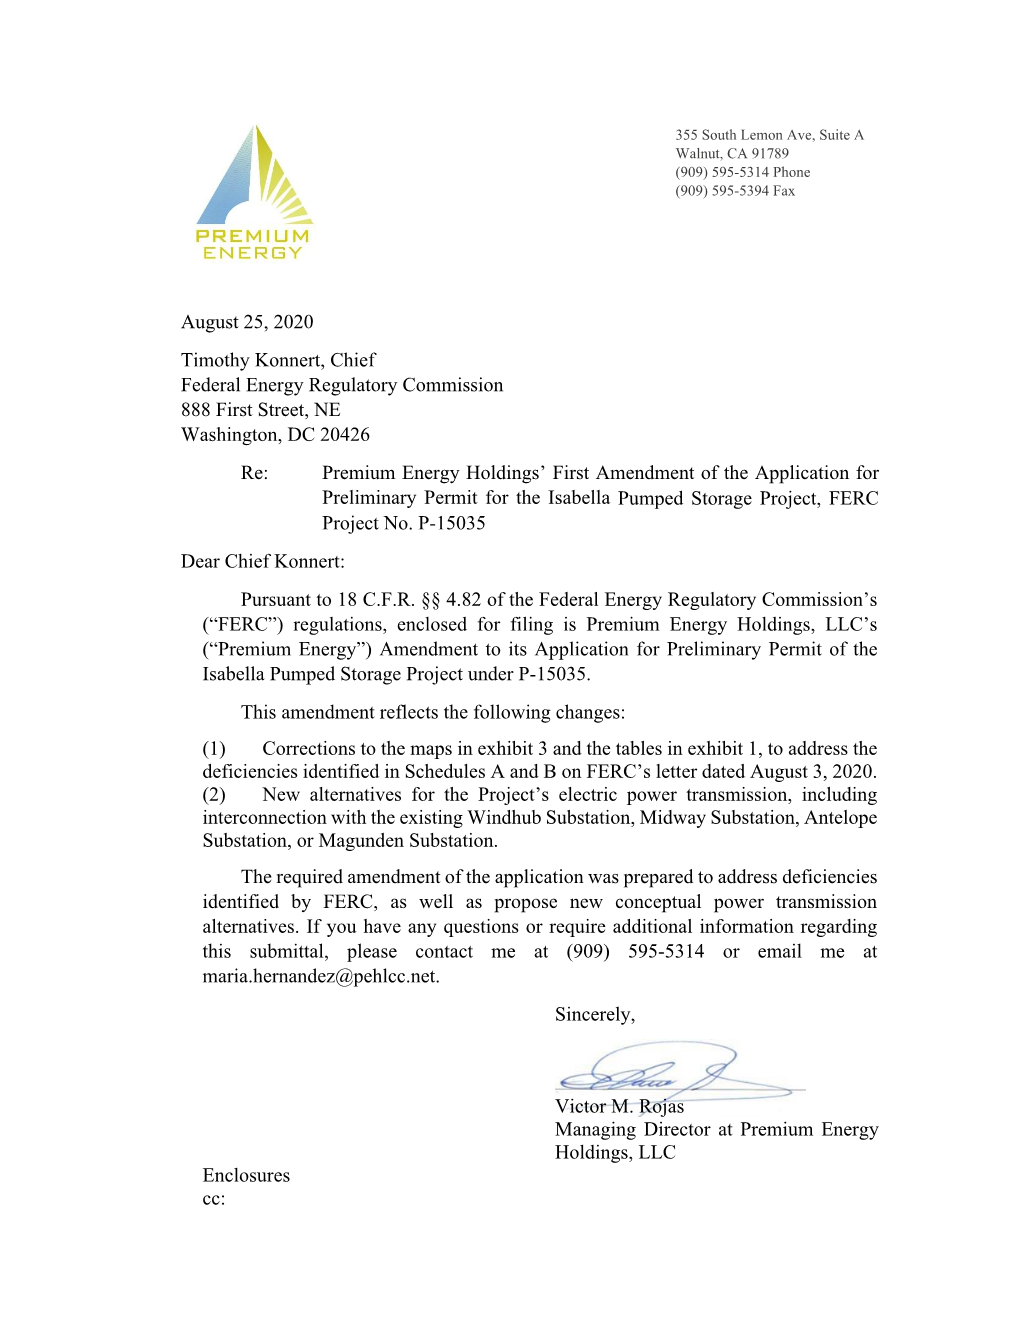 Premium Energy Holdings' First Amendment of the Application For